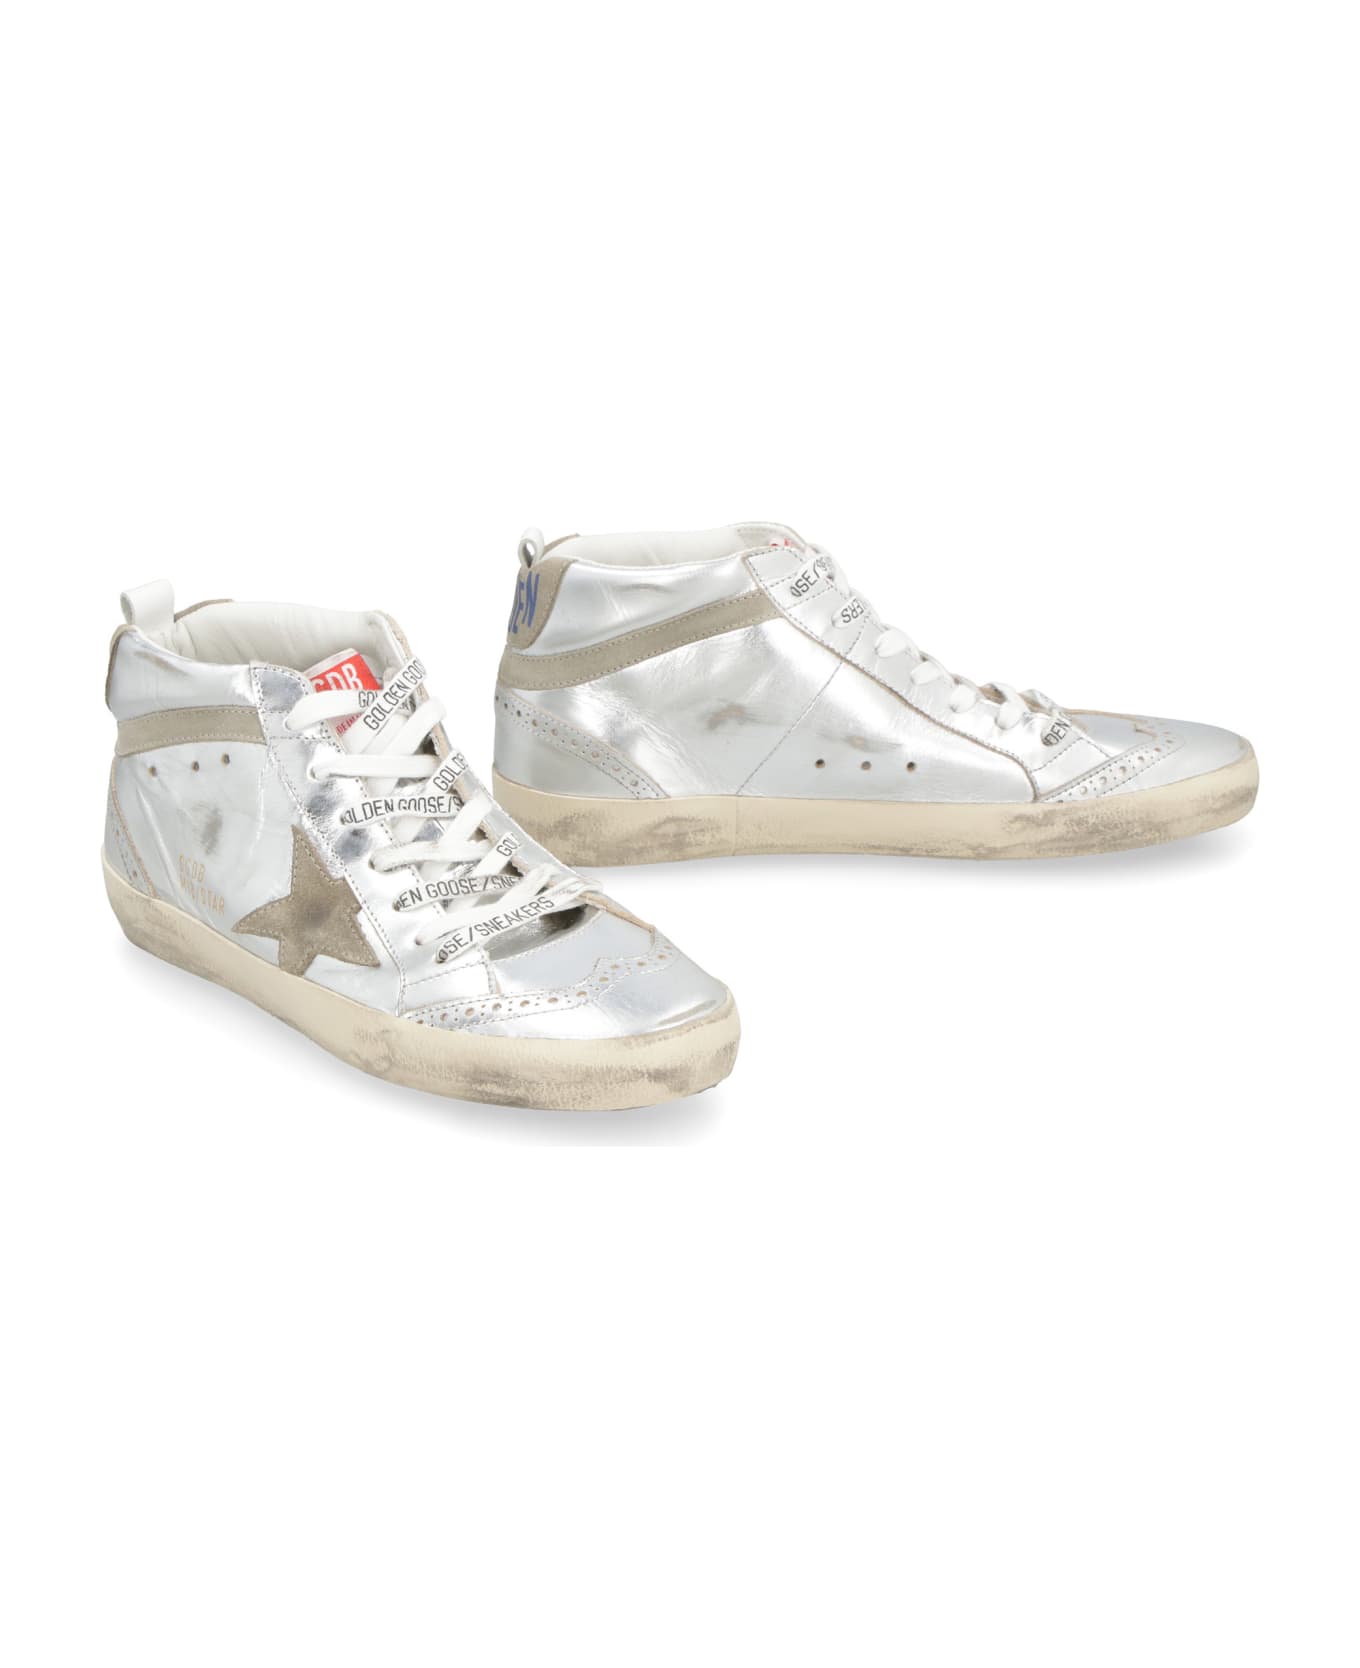 Golden Goose Mid Star Leather Sneakers - Silver スニーカー